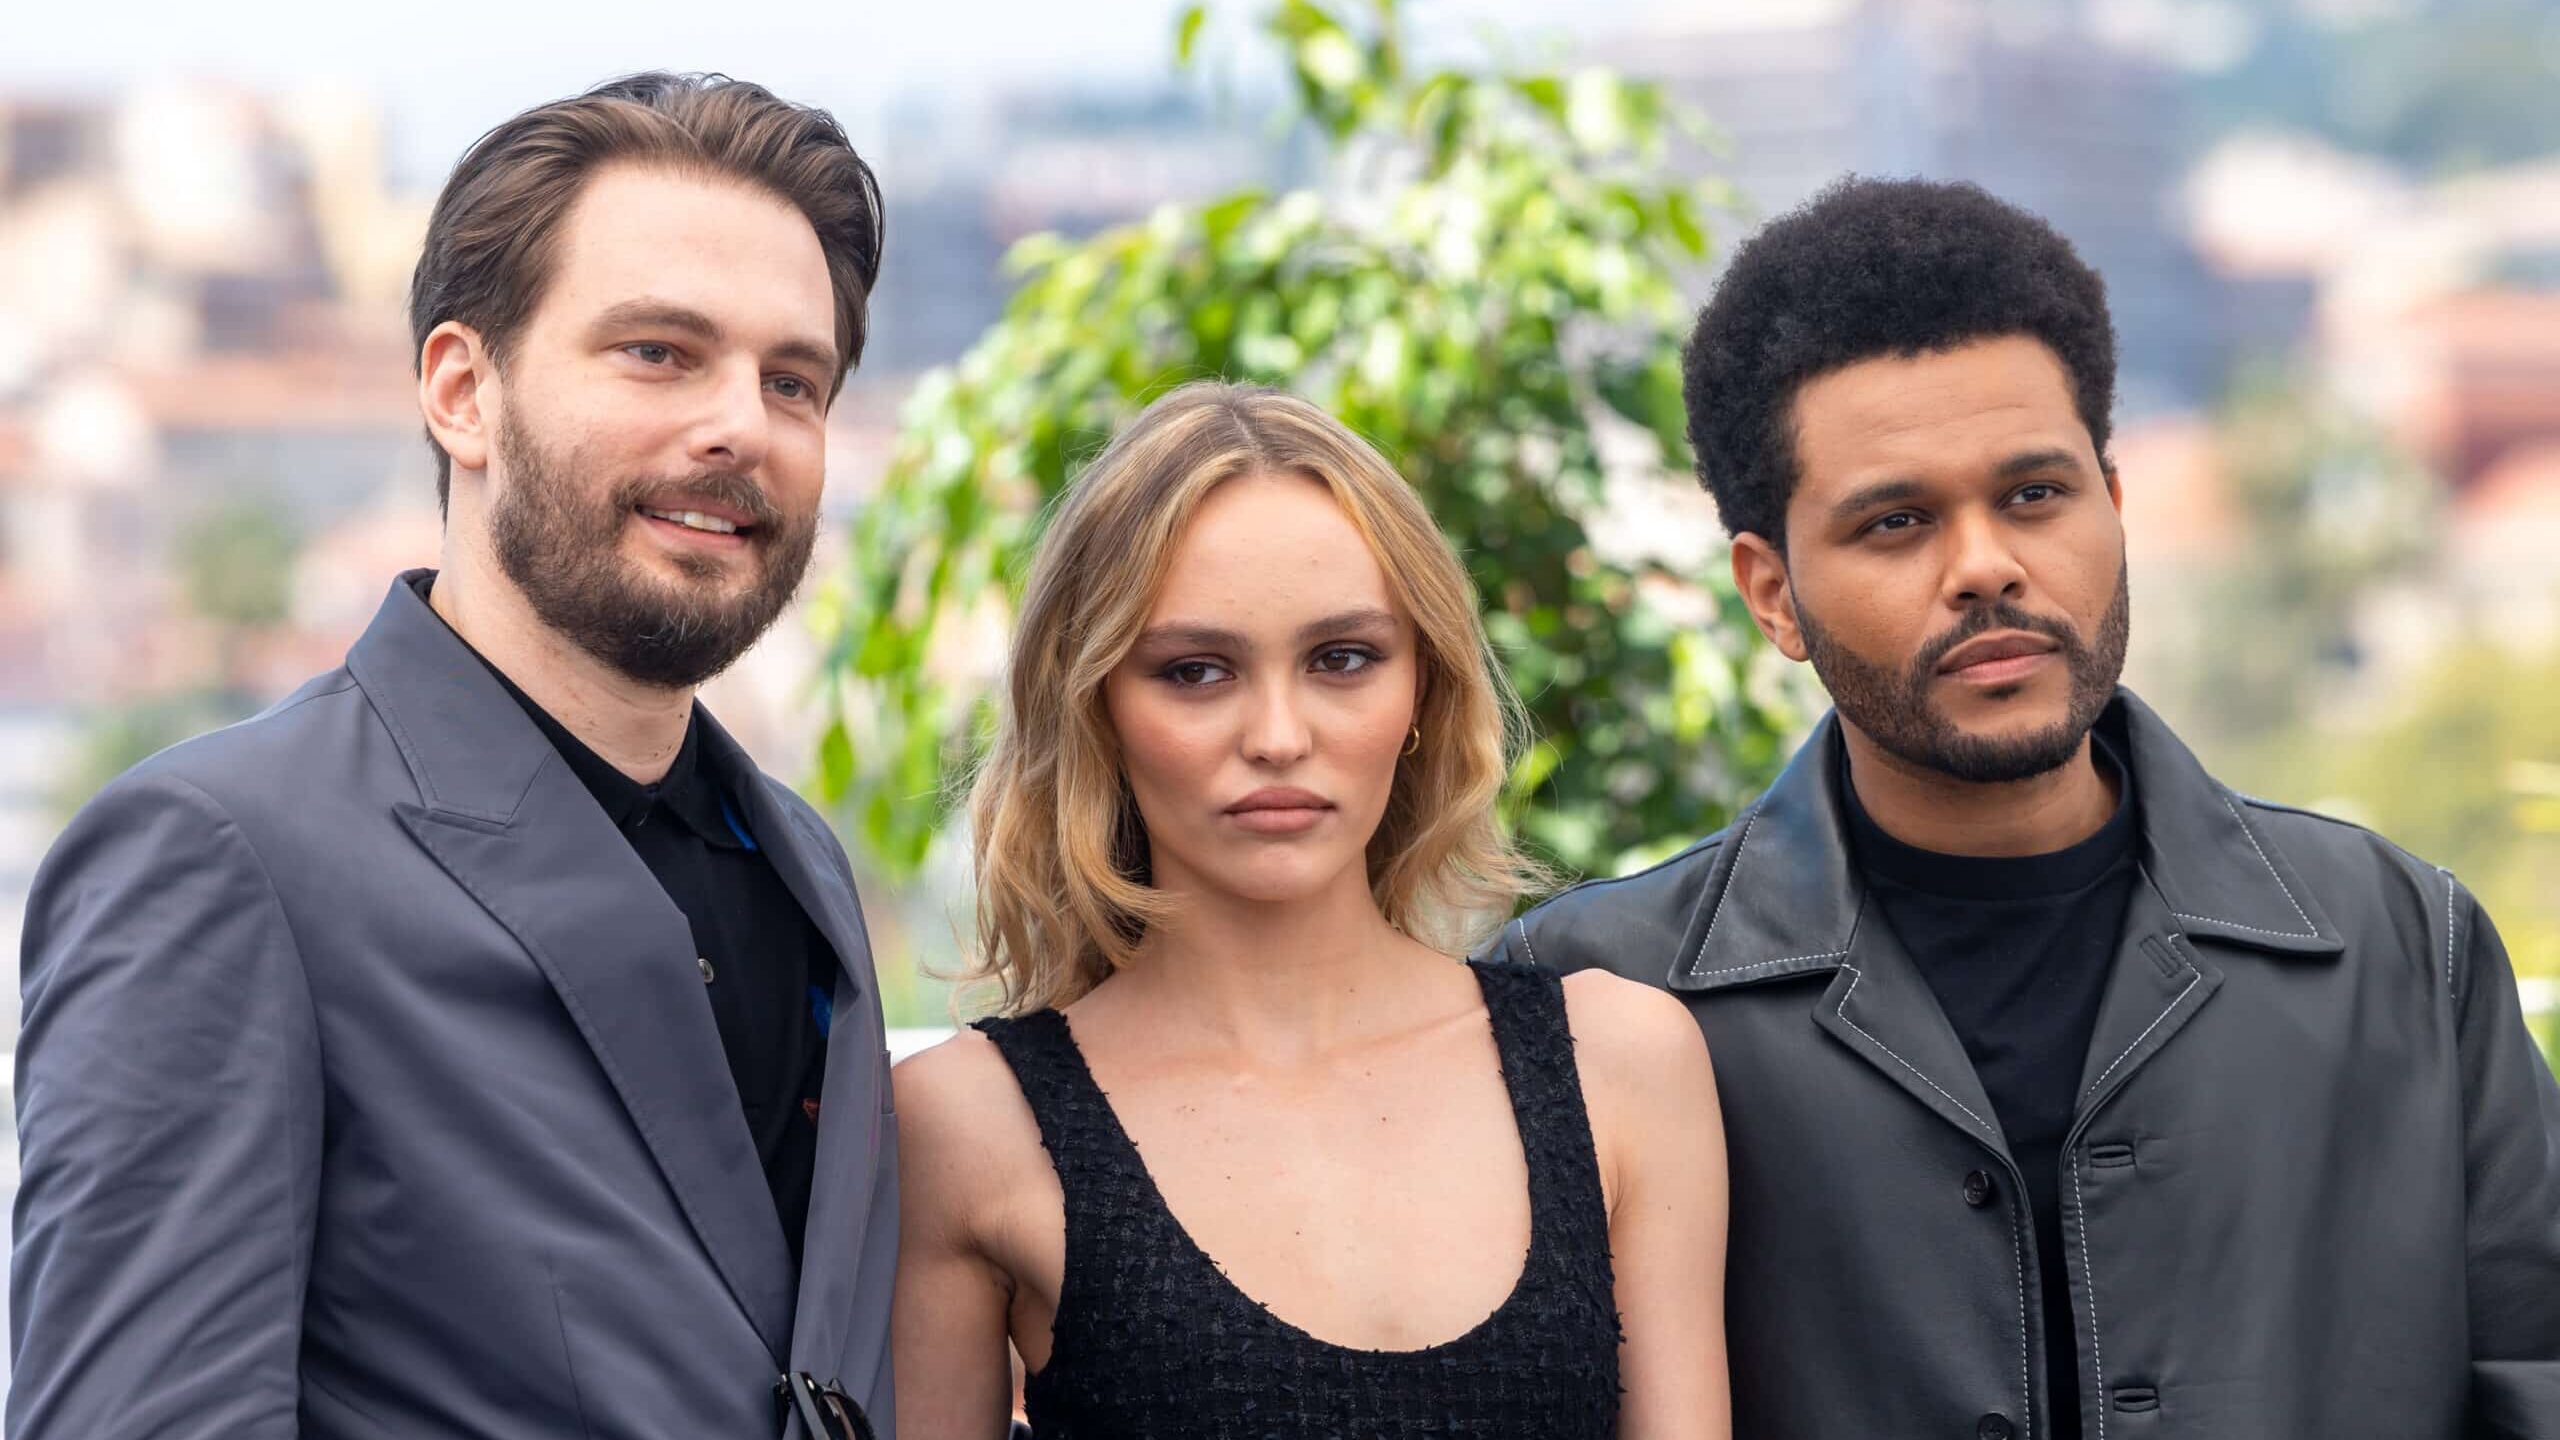 Sam Levinson, Lily-Rose Depp and Abel 'The Weeknd' Tesfaye attend "The Idol" photocall at the 76th annual Cannes film festival at Palais des Festivals on May 23, 2023 in Cannes, France.